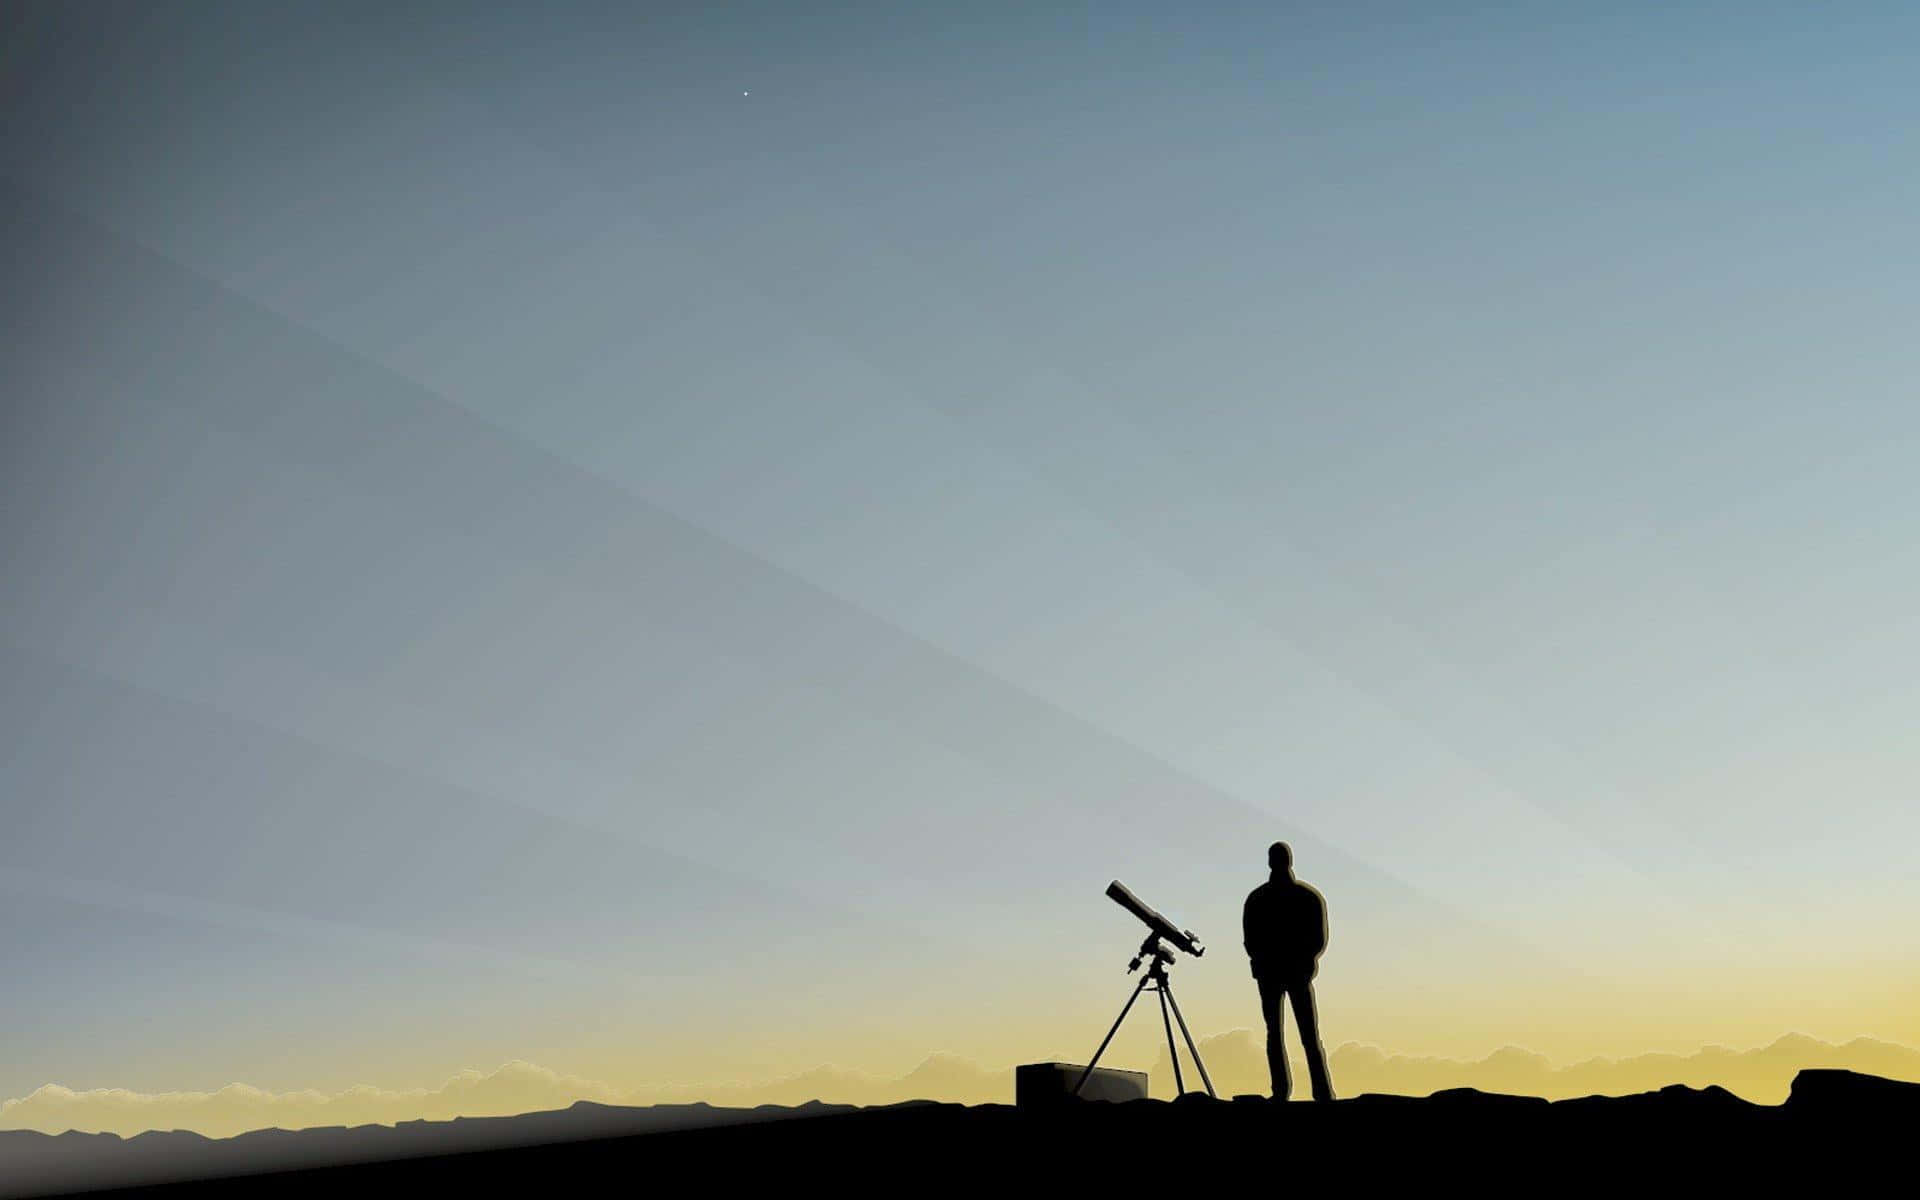 Stargazing with a telescope